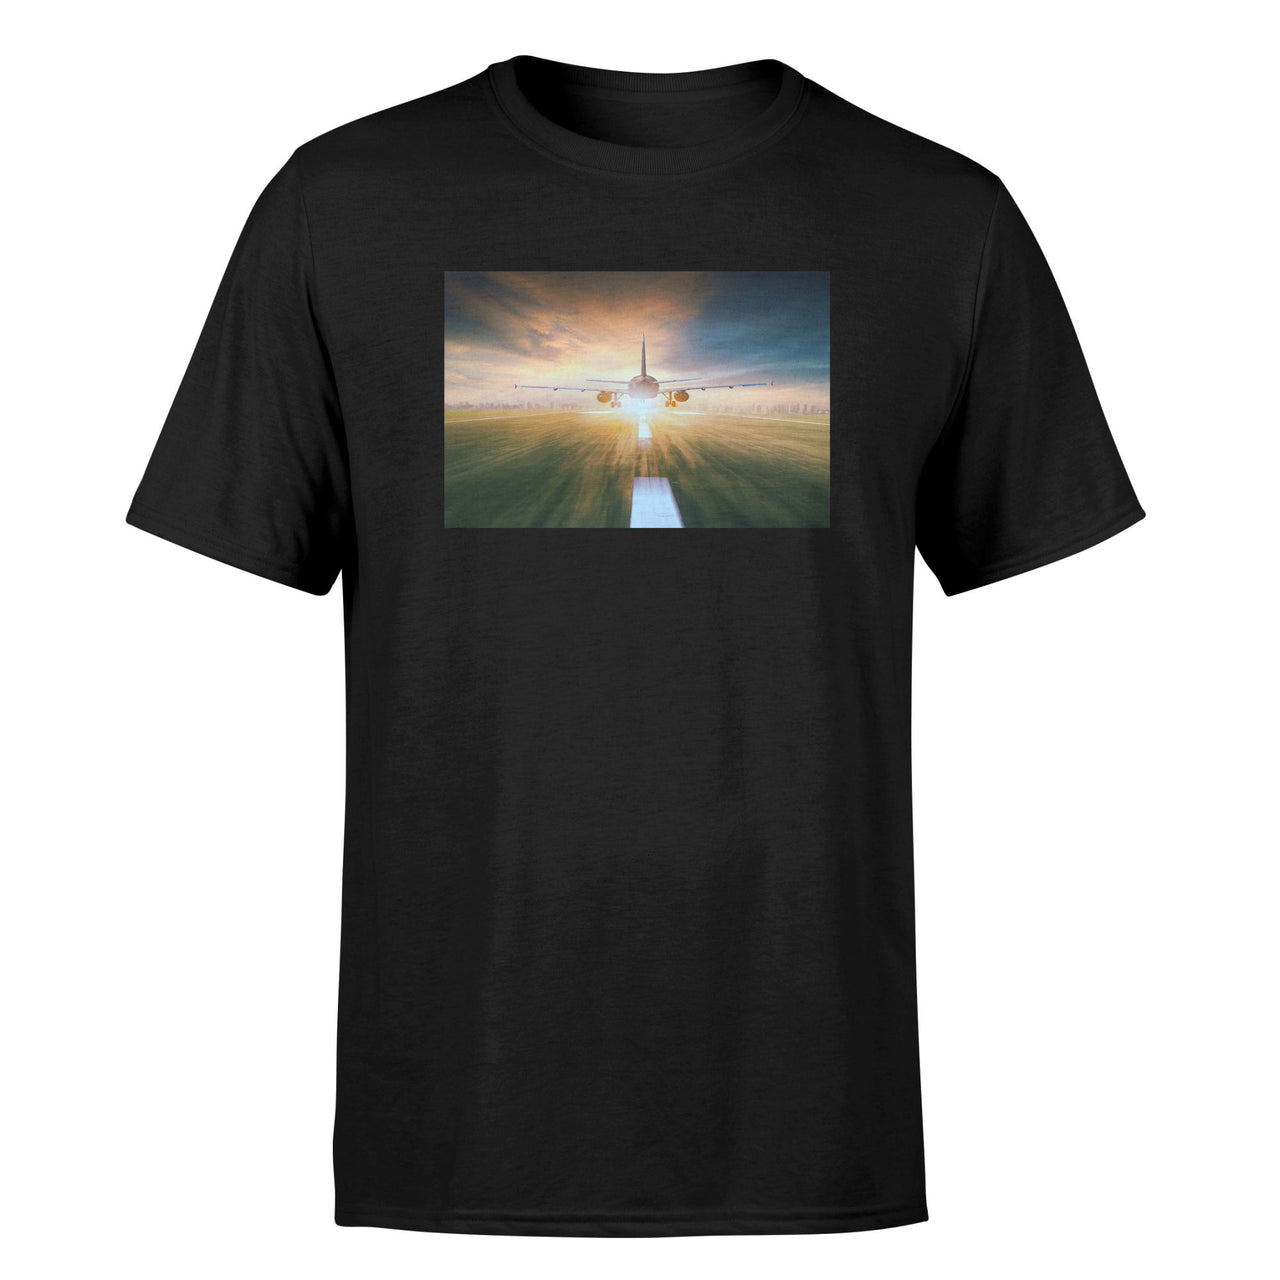 Airplane Flying Over Runway Designed T-Shirts